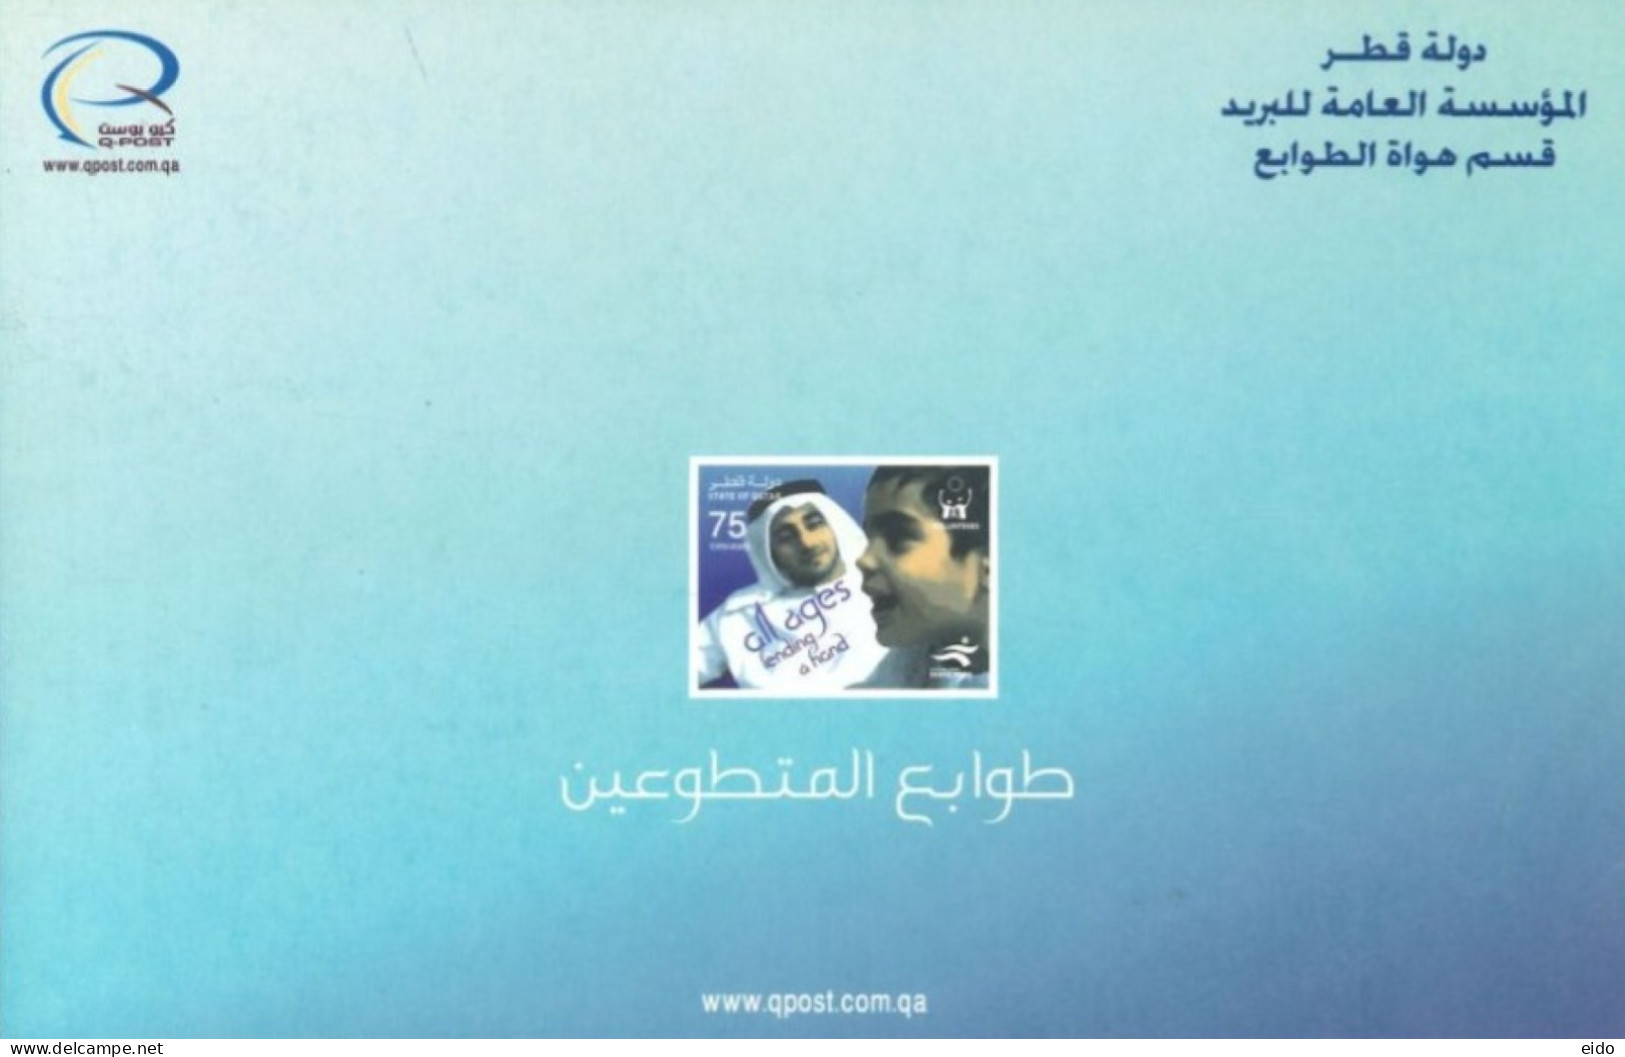 QATAR  - 2006, POSTAL STAMP BULETIN OF VOLUNTEERS STAMPS AND TECHNICAL DETAILS. - Qatar